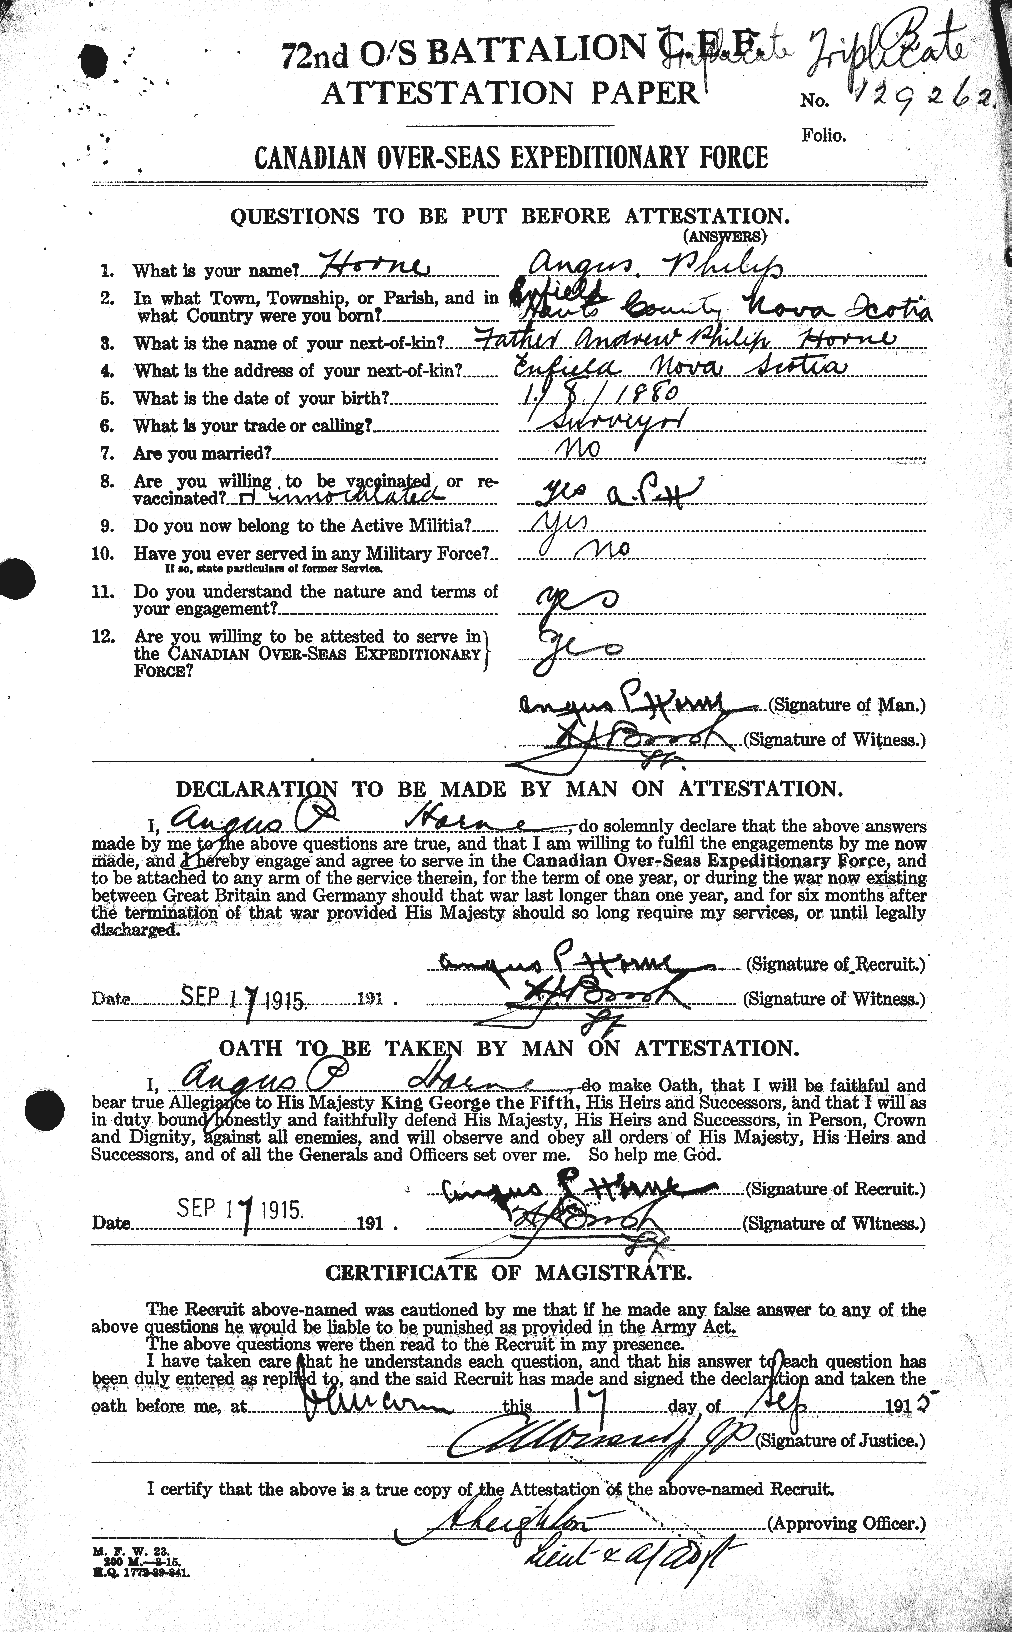 Personnel Records of the First World War - CEF 399565a